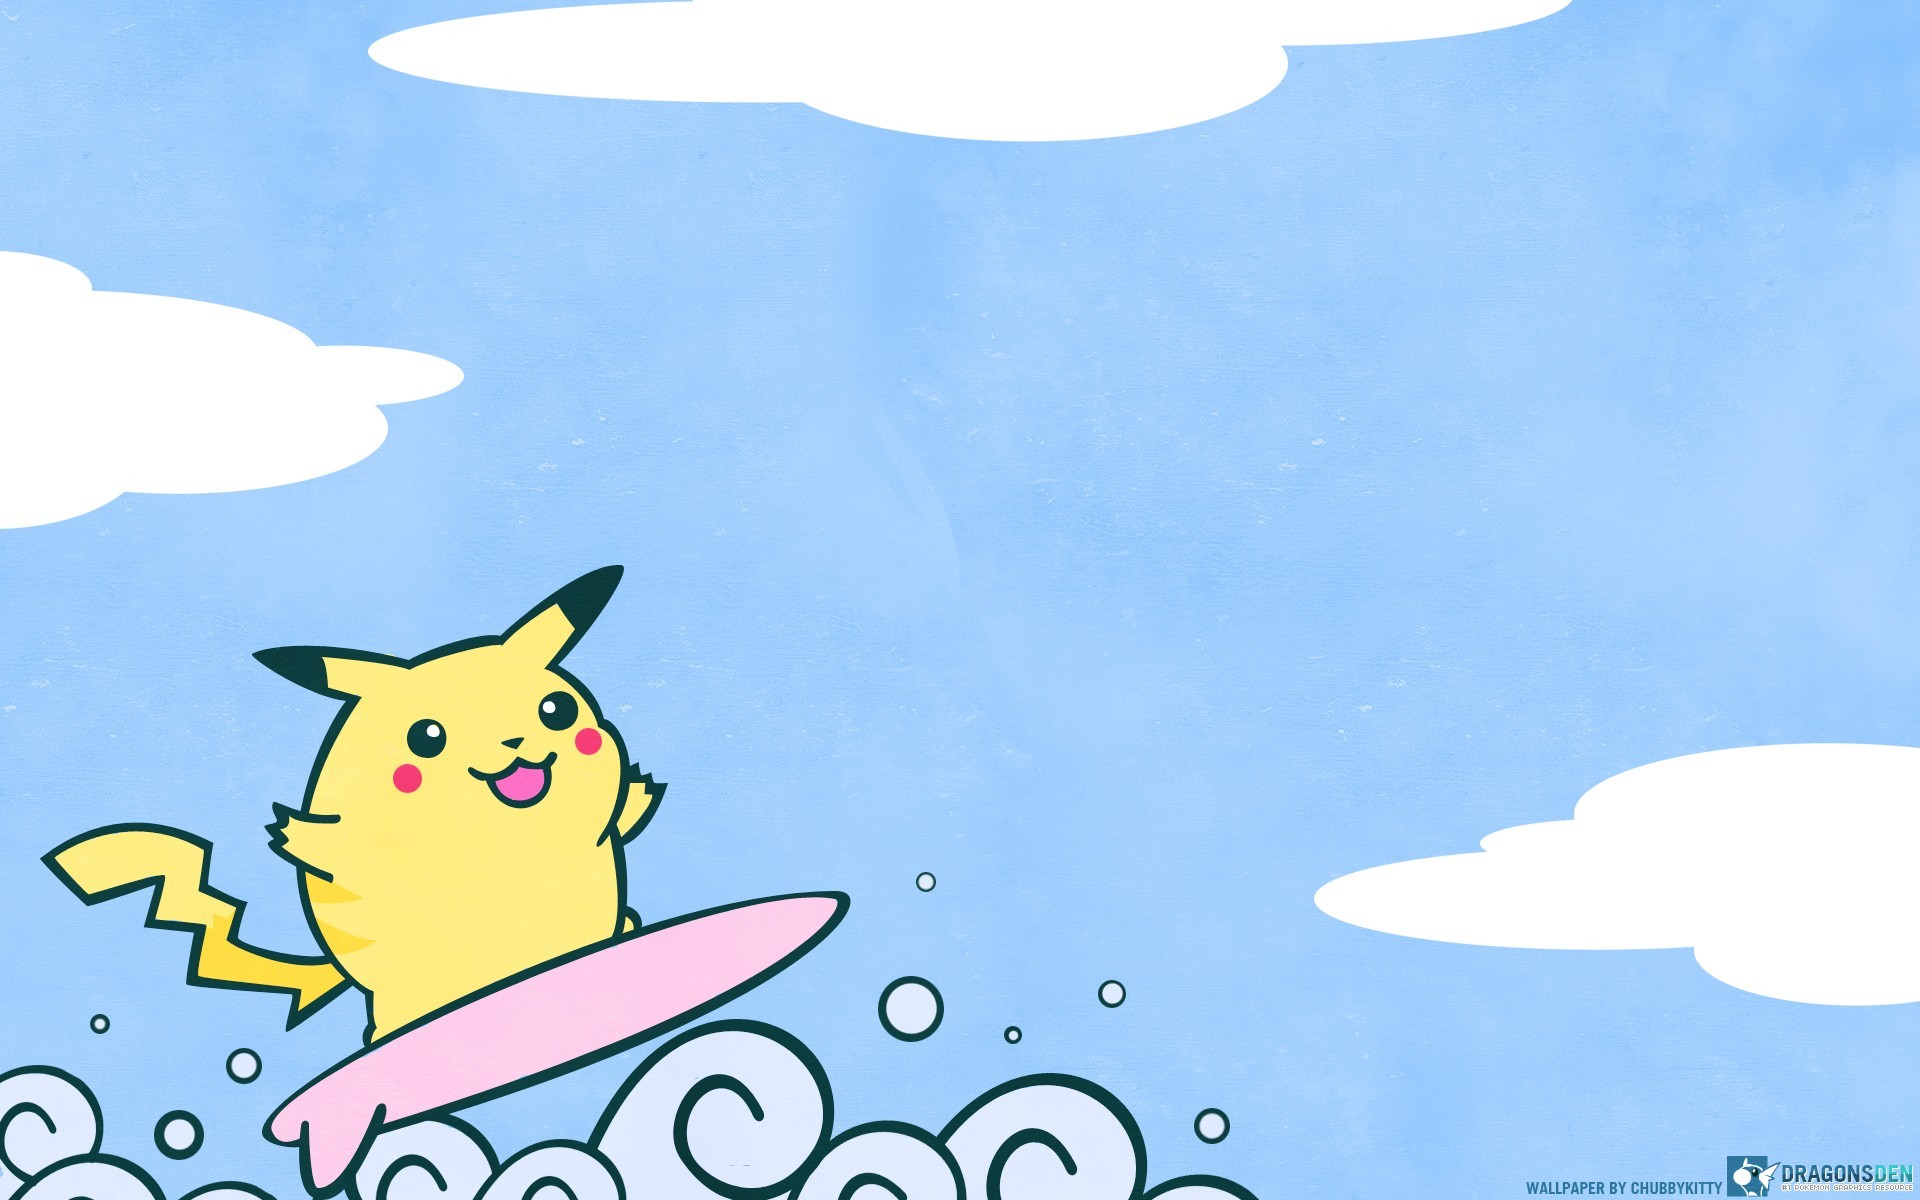 Wallpaper, Surfing Pikachu iPhone Wallpaper, Surfing Pikachu Android